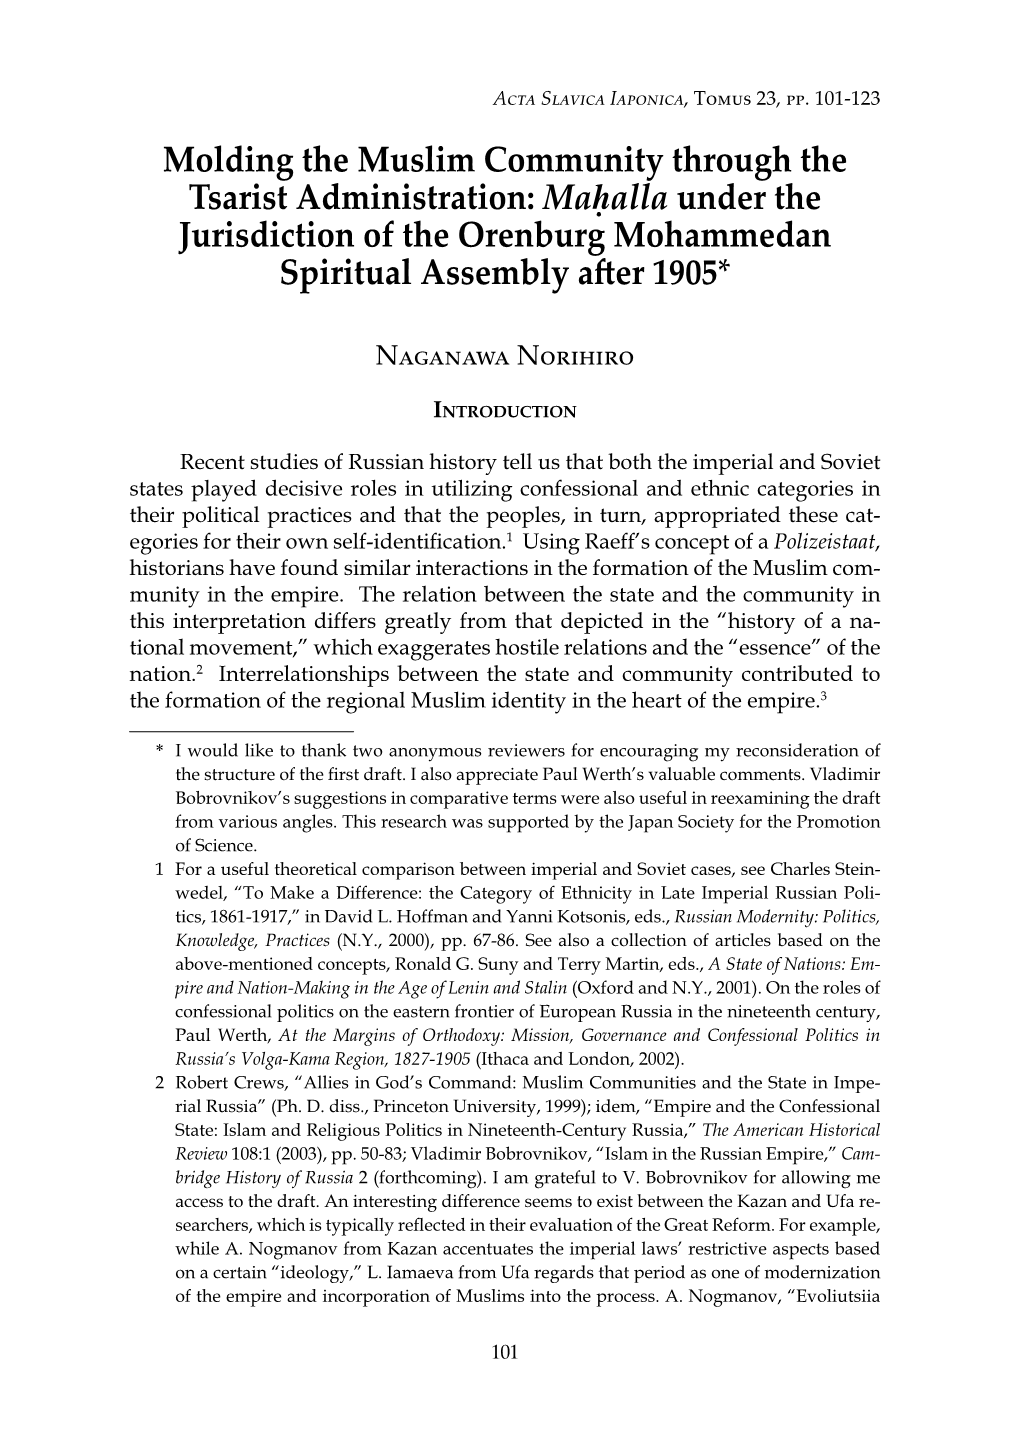 Molding the Muslim Community Through the Tsarist Administration: Maalla Under the Jurisdiction of the Orenburg Mohammedan Spiritual Assembly After 1905*